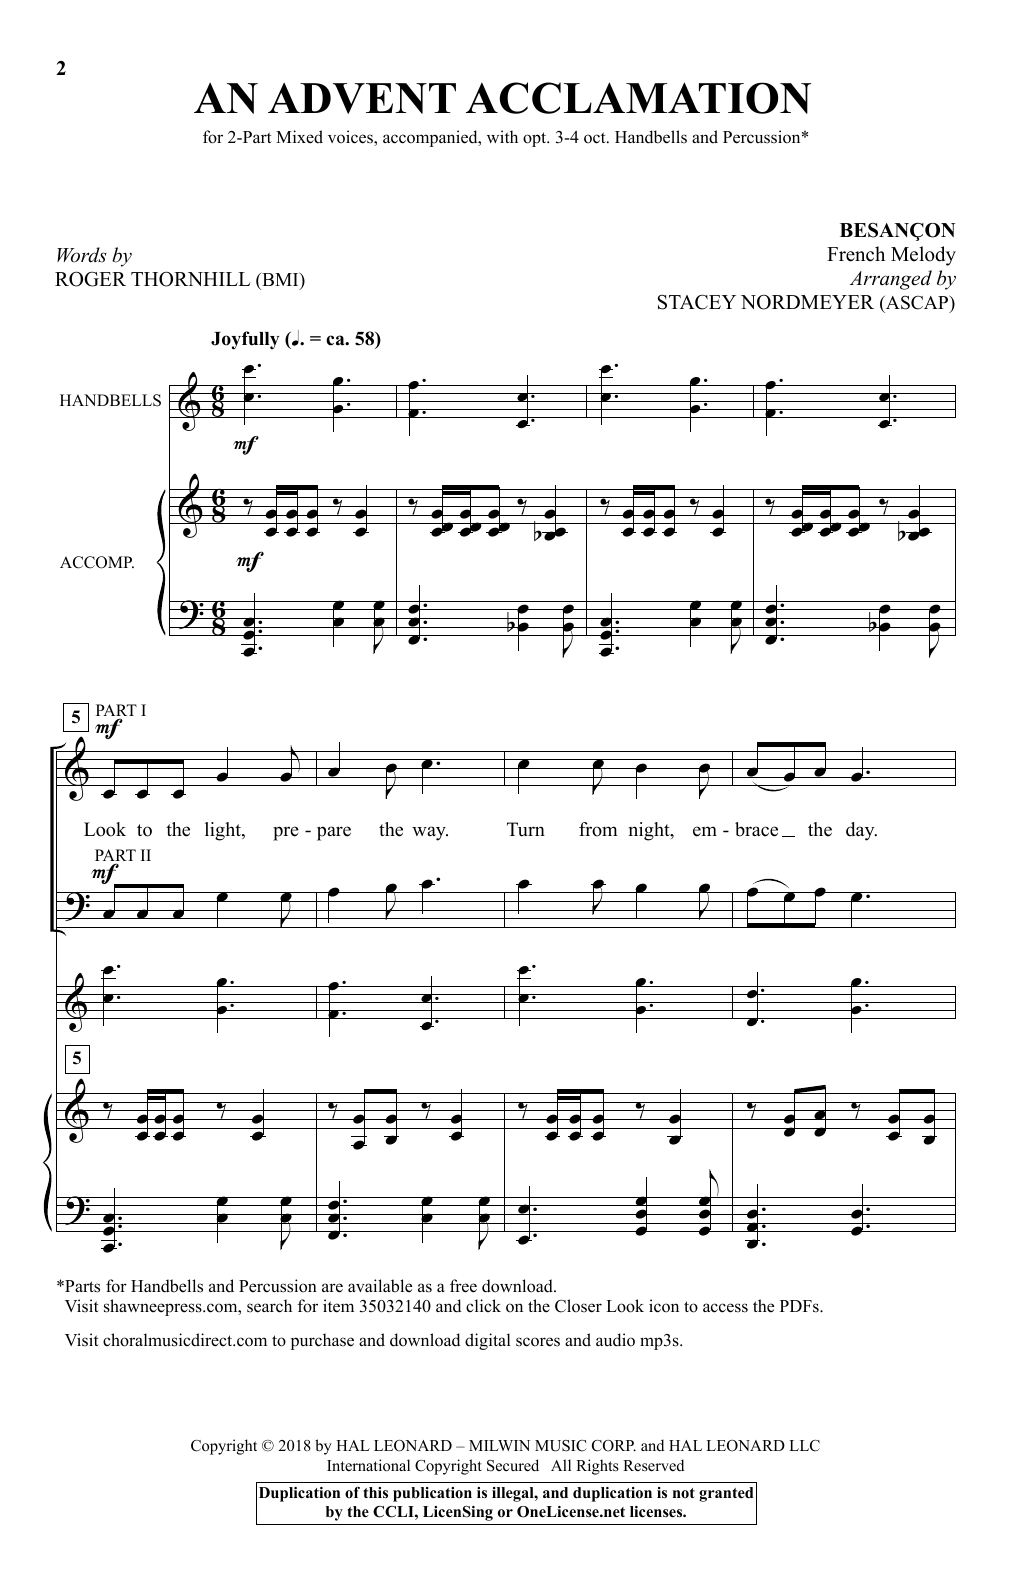 Download Stacey Nordmeyer An Advent Acclamation Sheet Music